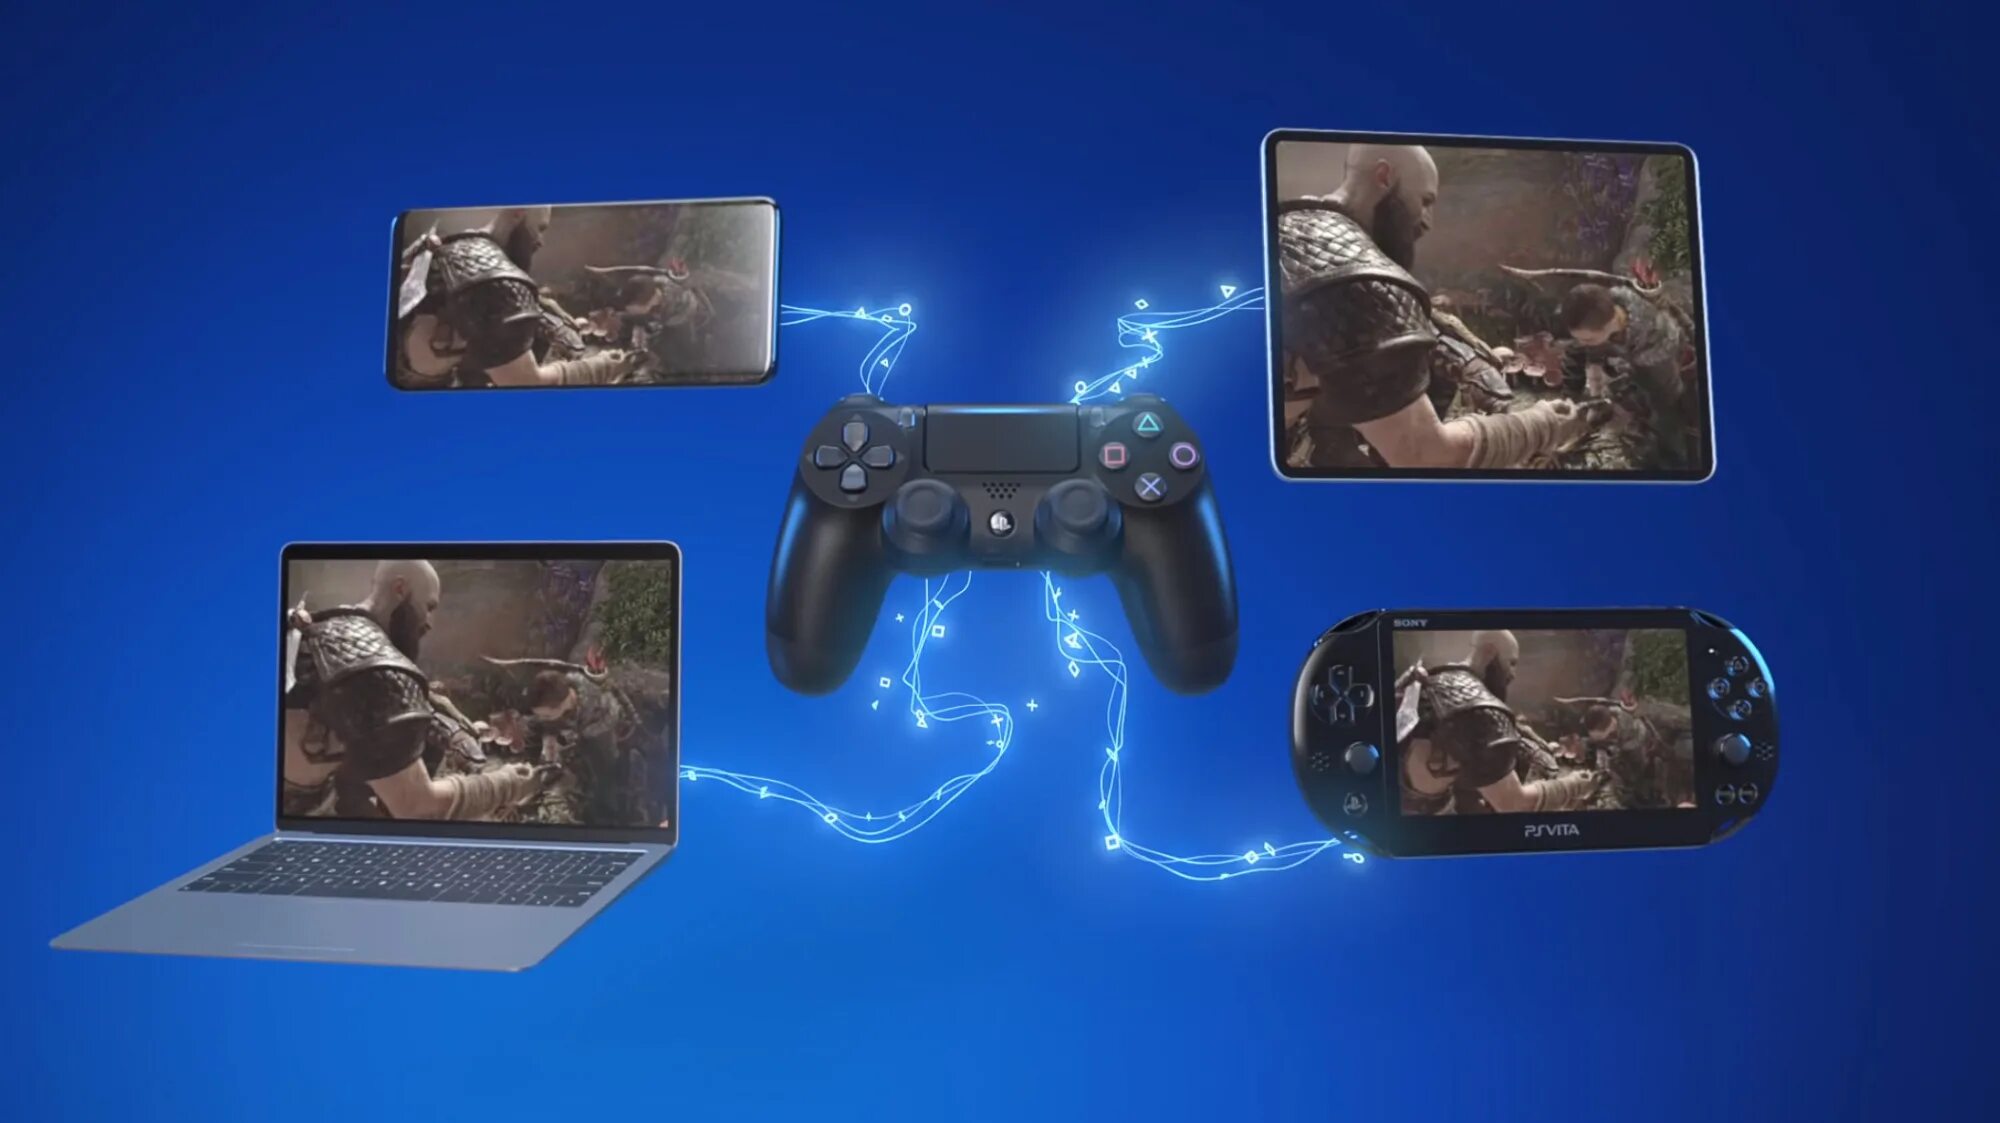 Ps5 windows. Remote Play ps5 ps4. PS Remote Play ps5. Ps4 Remote Play код. Два экрана Remote Play.